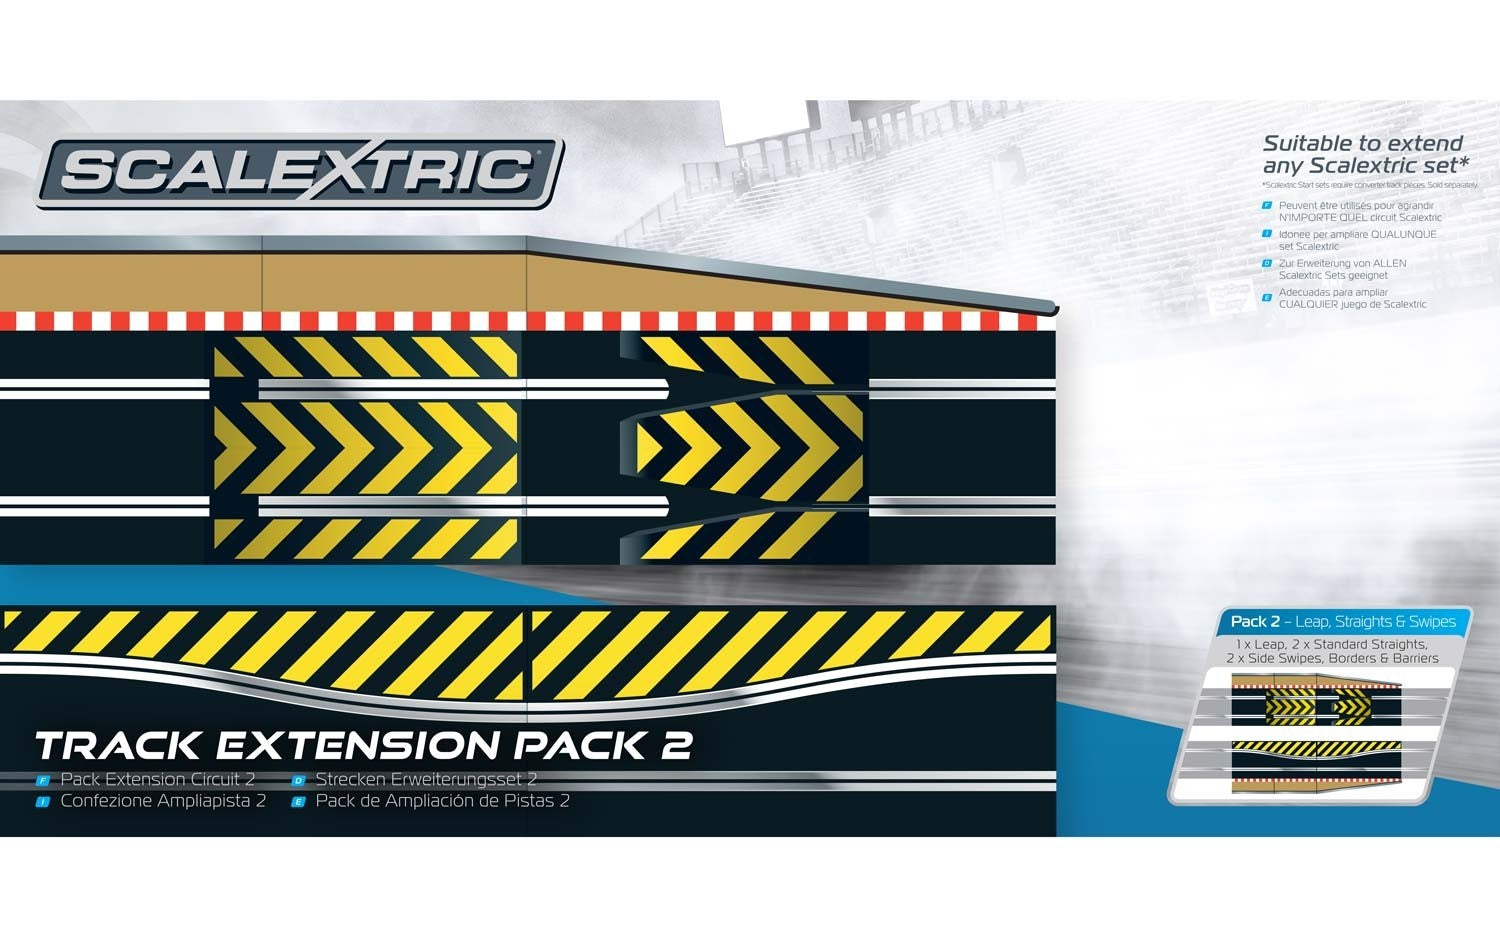 Scalextric Extension Pack Slot Car Track Set